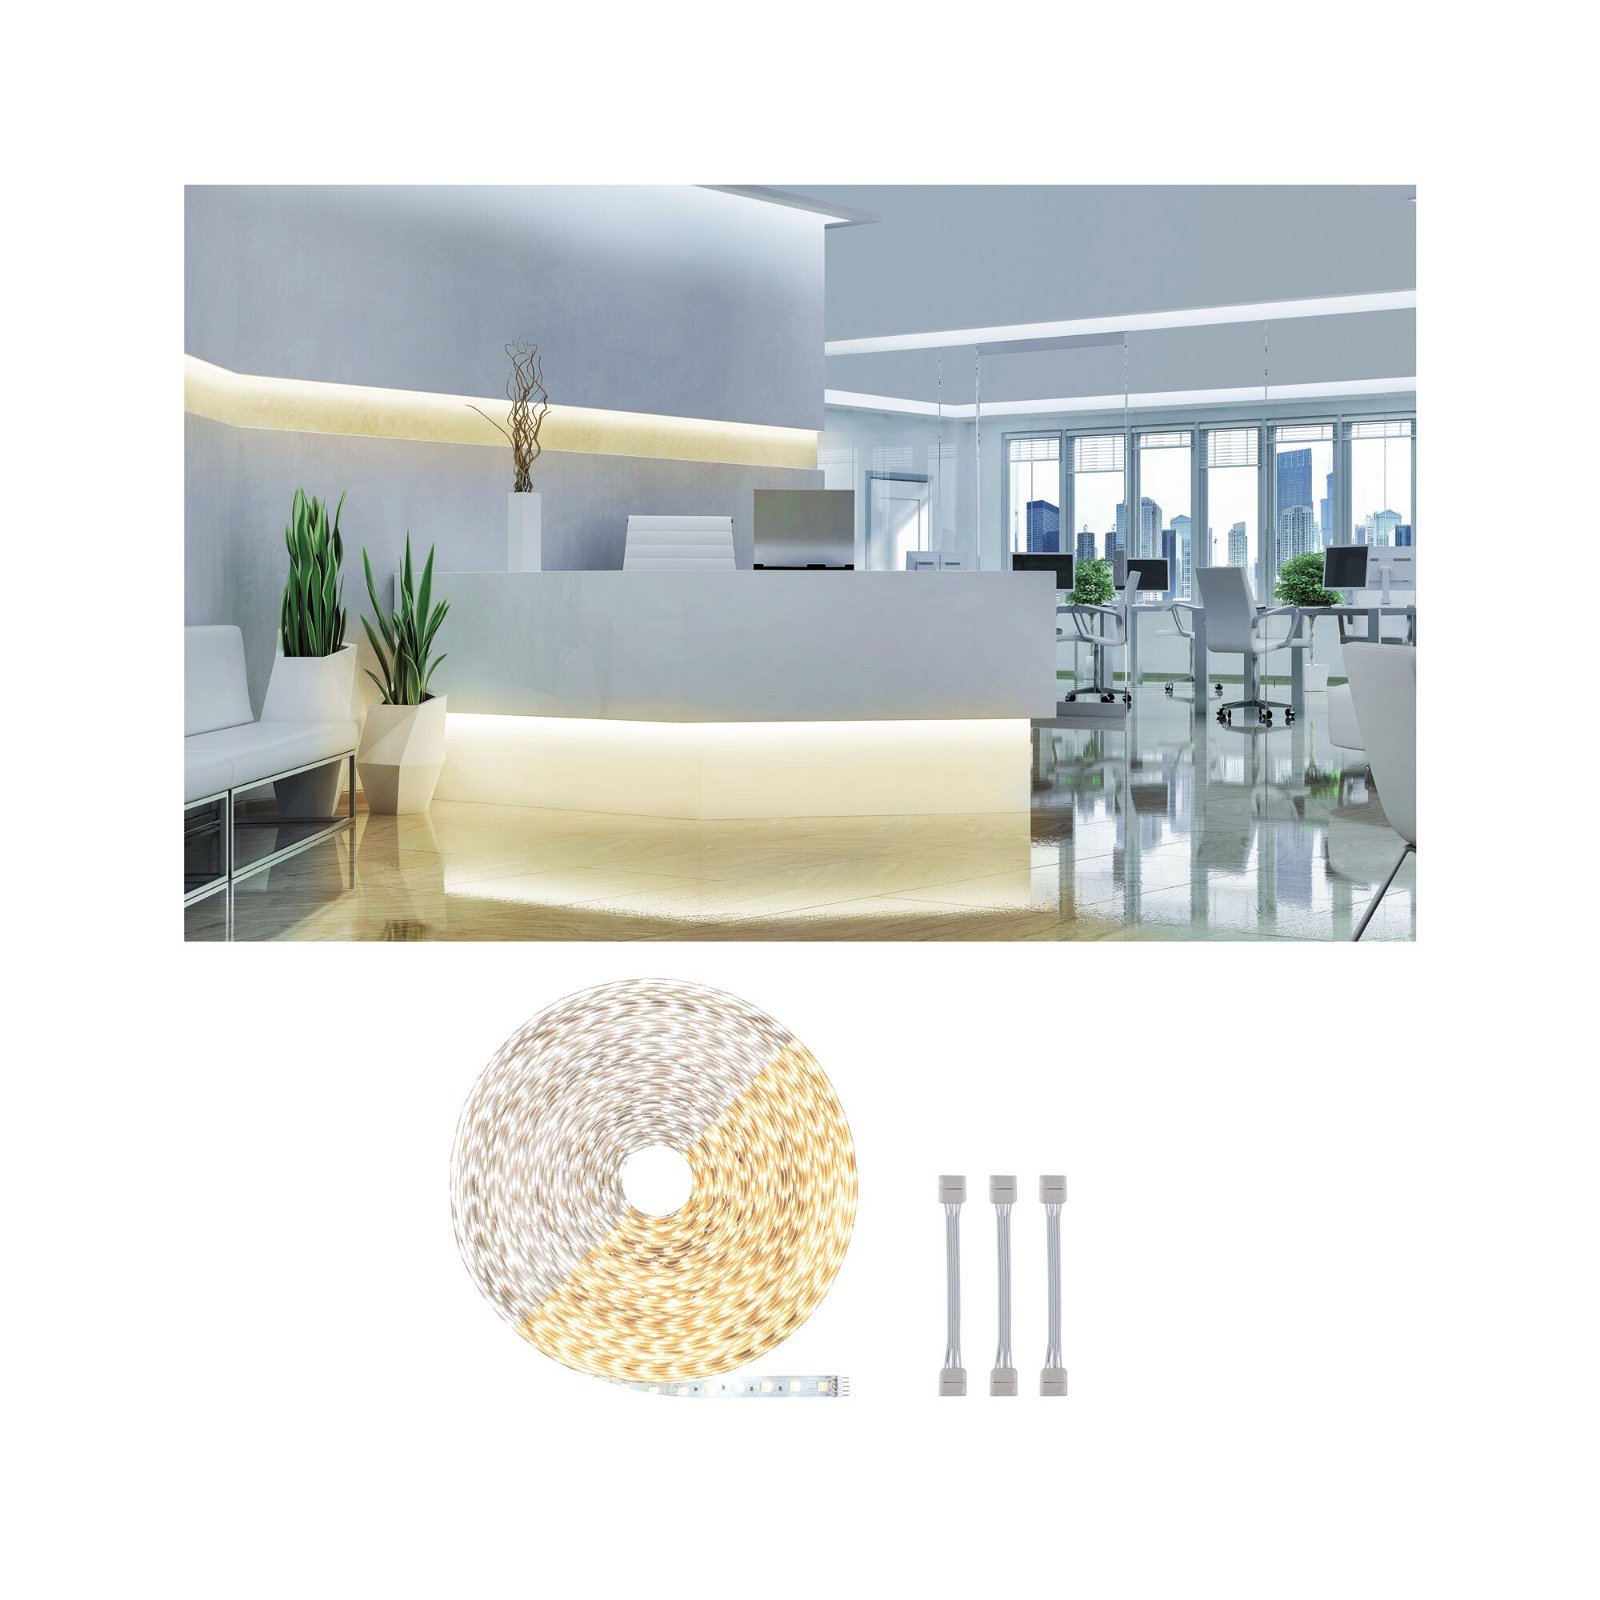 MaxLED 500 LED Strip Tunable White Einzelstripe inkl. Adapterkabel 20m 72W 550lm/m 60 LEDs/m Tunable White